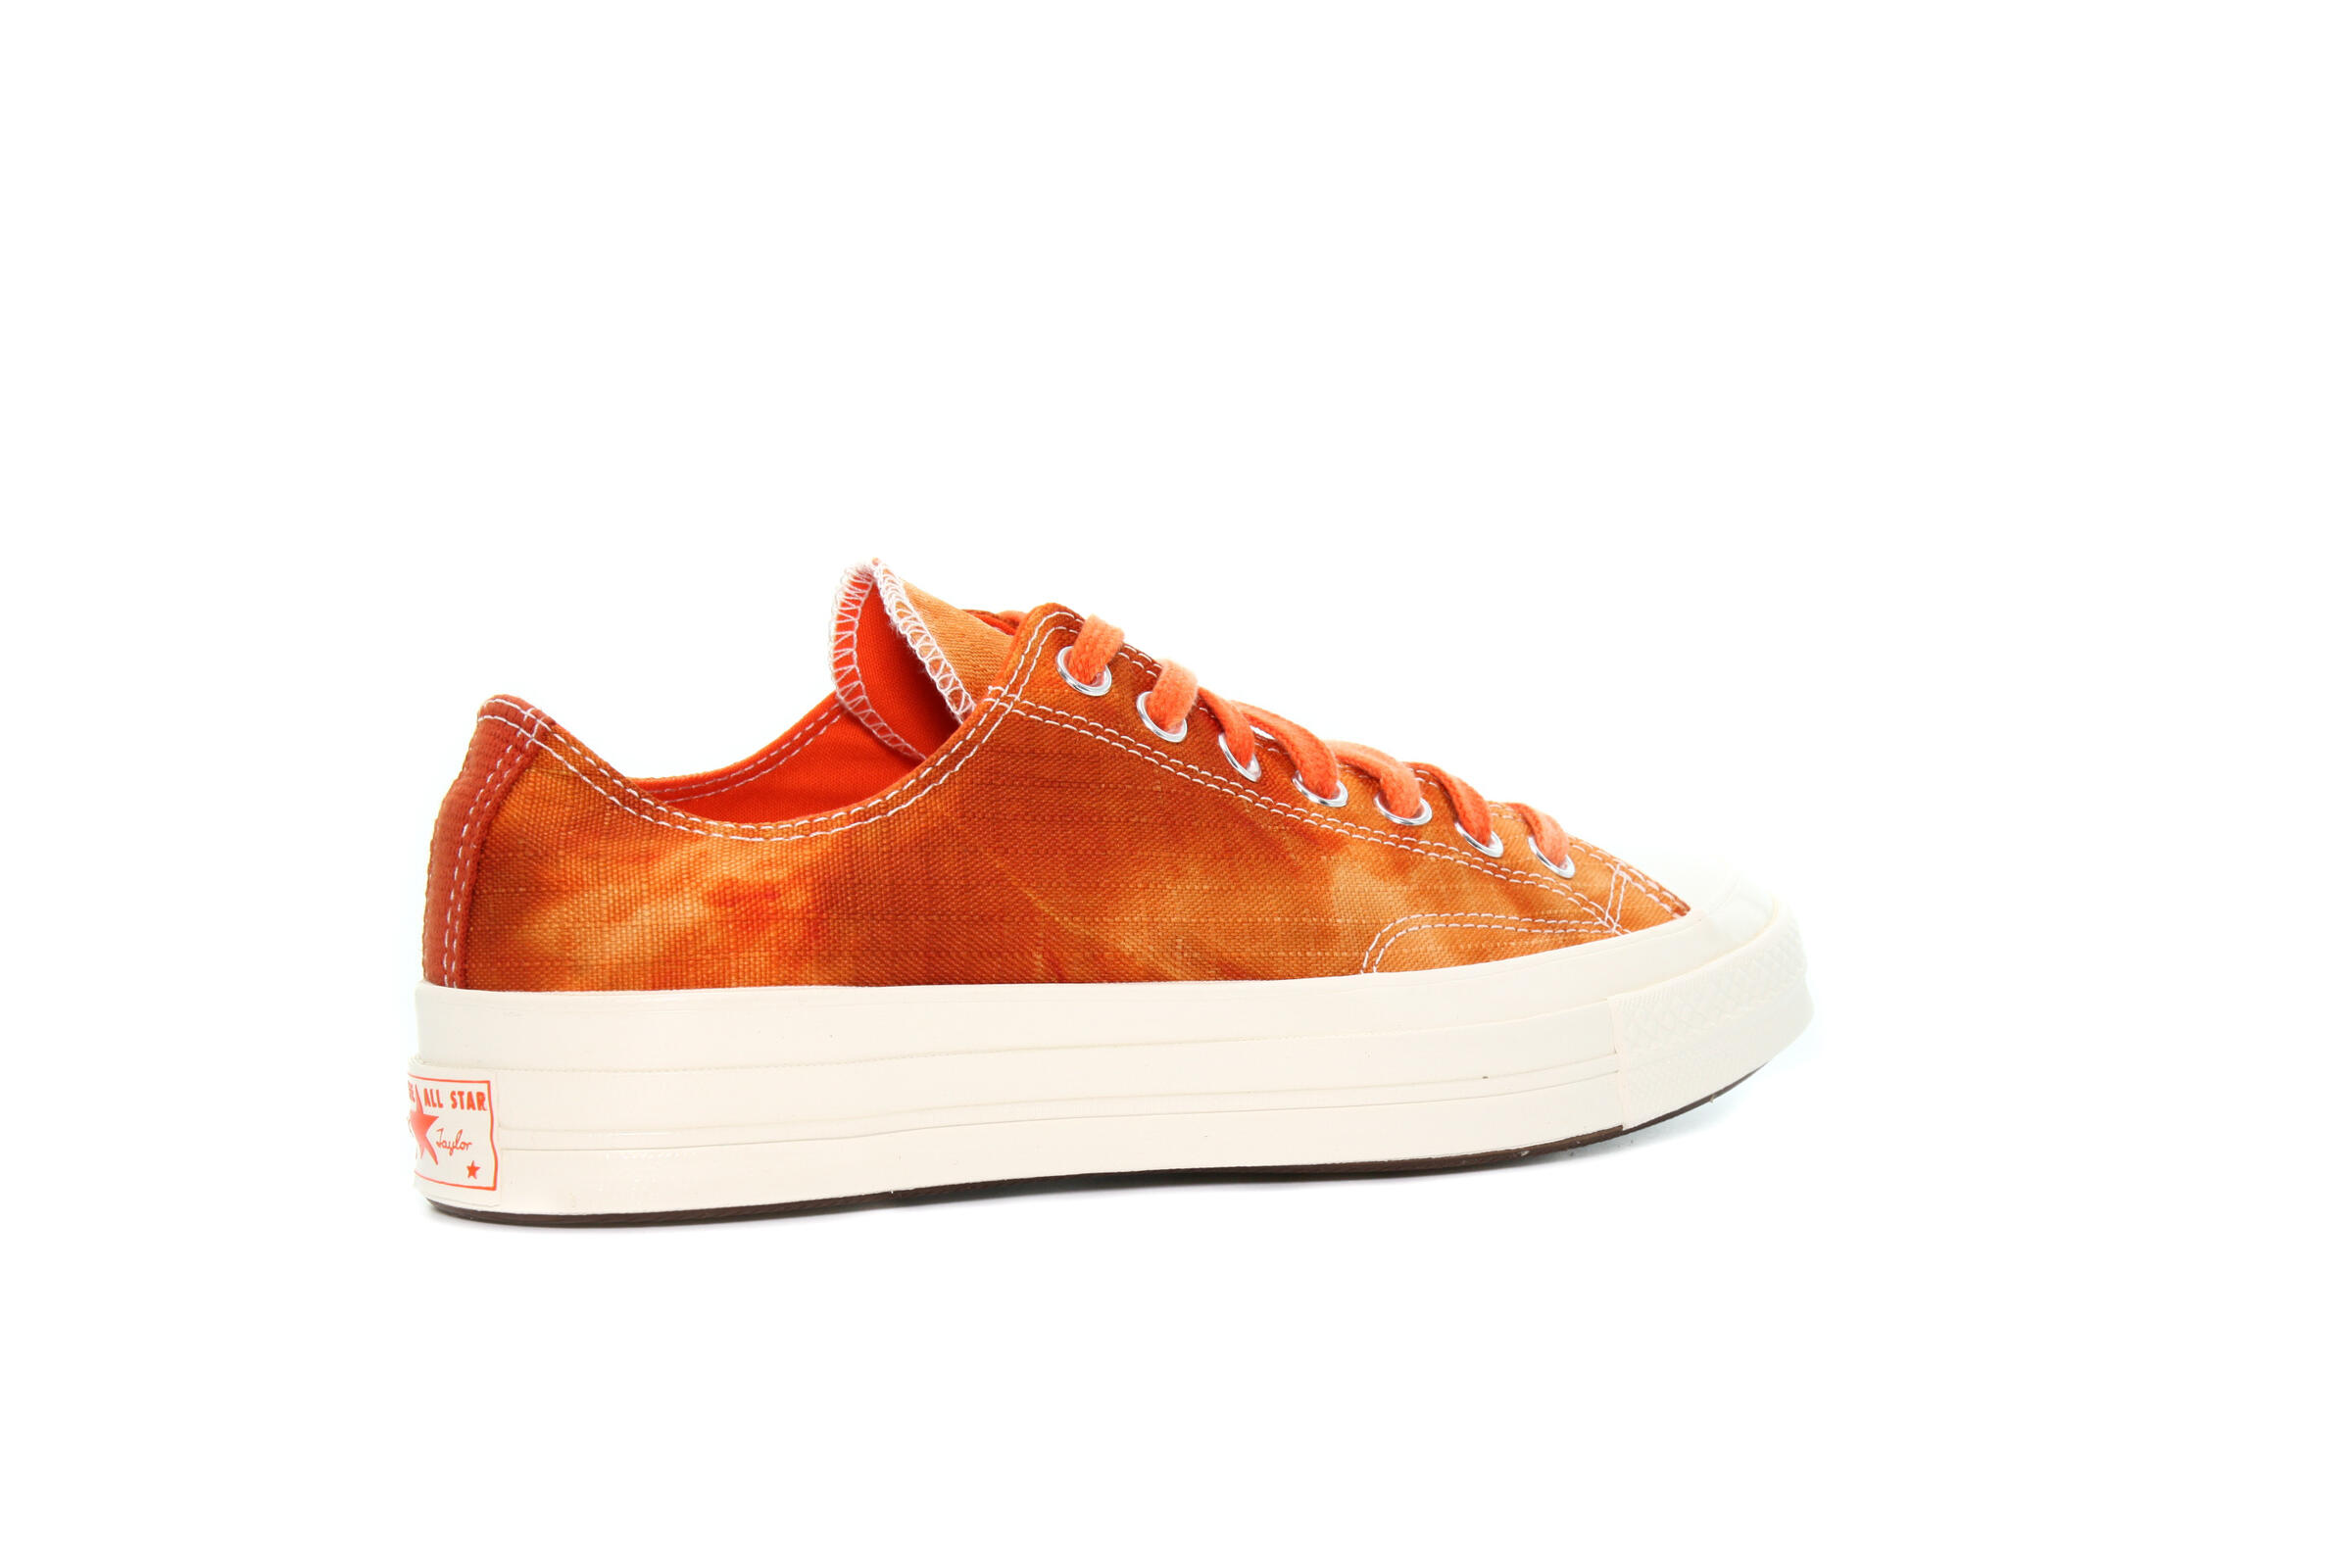 Converse CHUCK 70 OX TWISTED VACATION PACK "VENETIAN RUST"